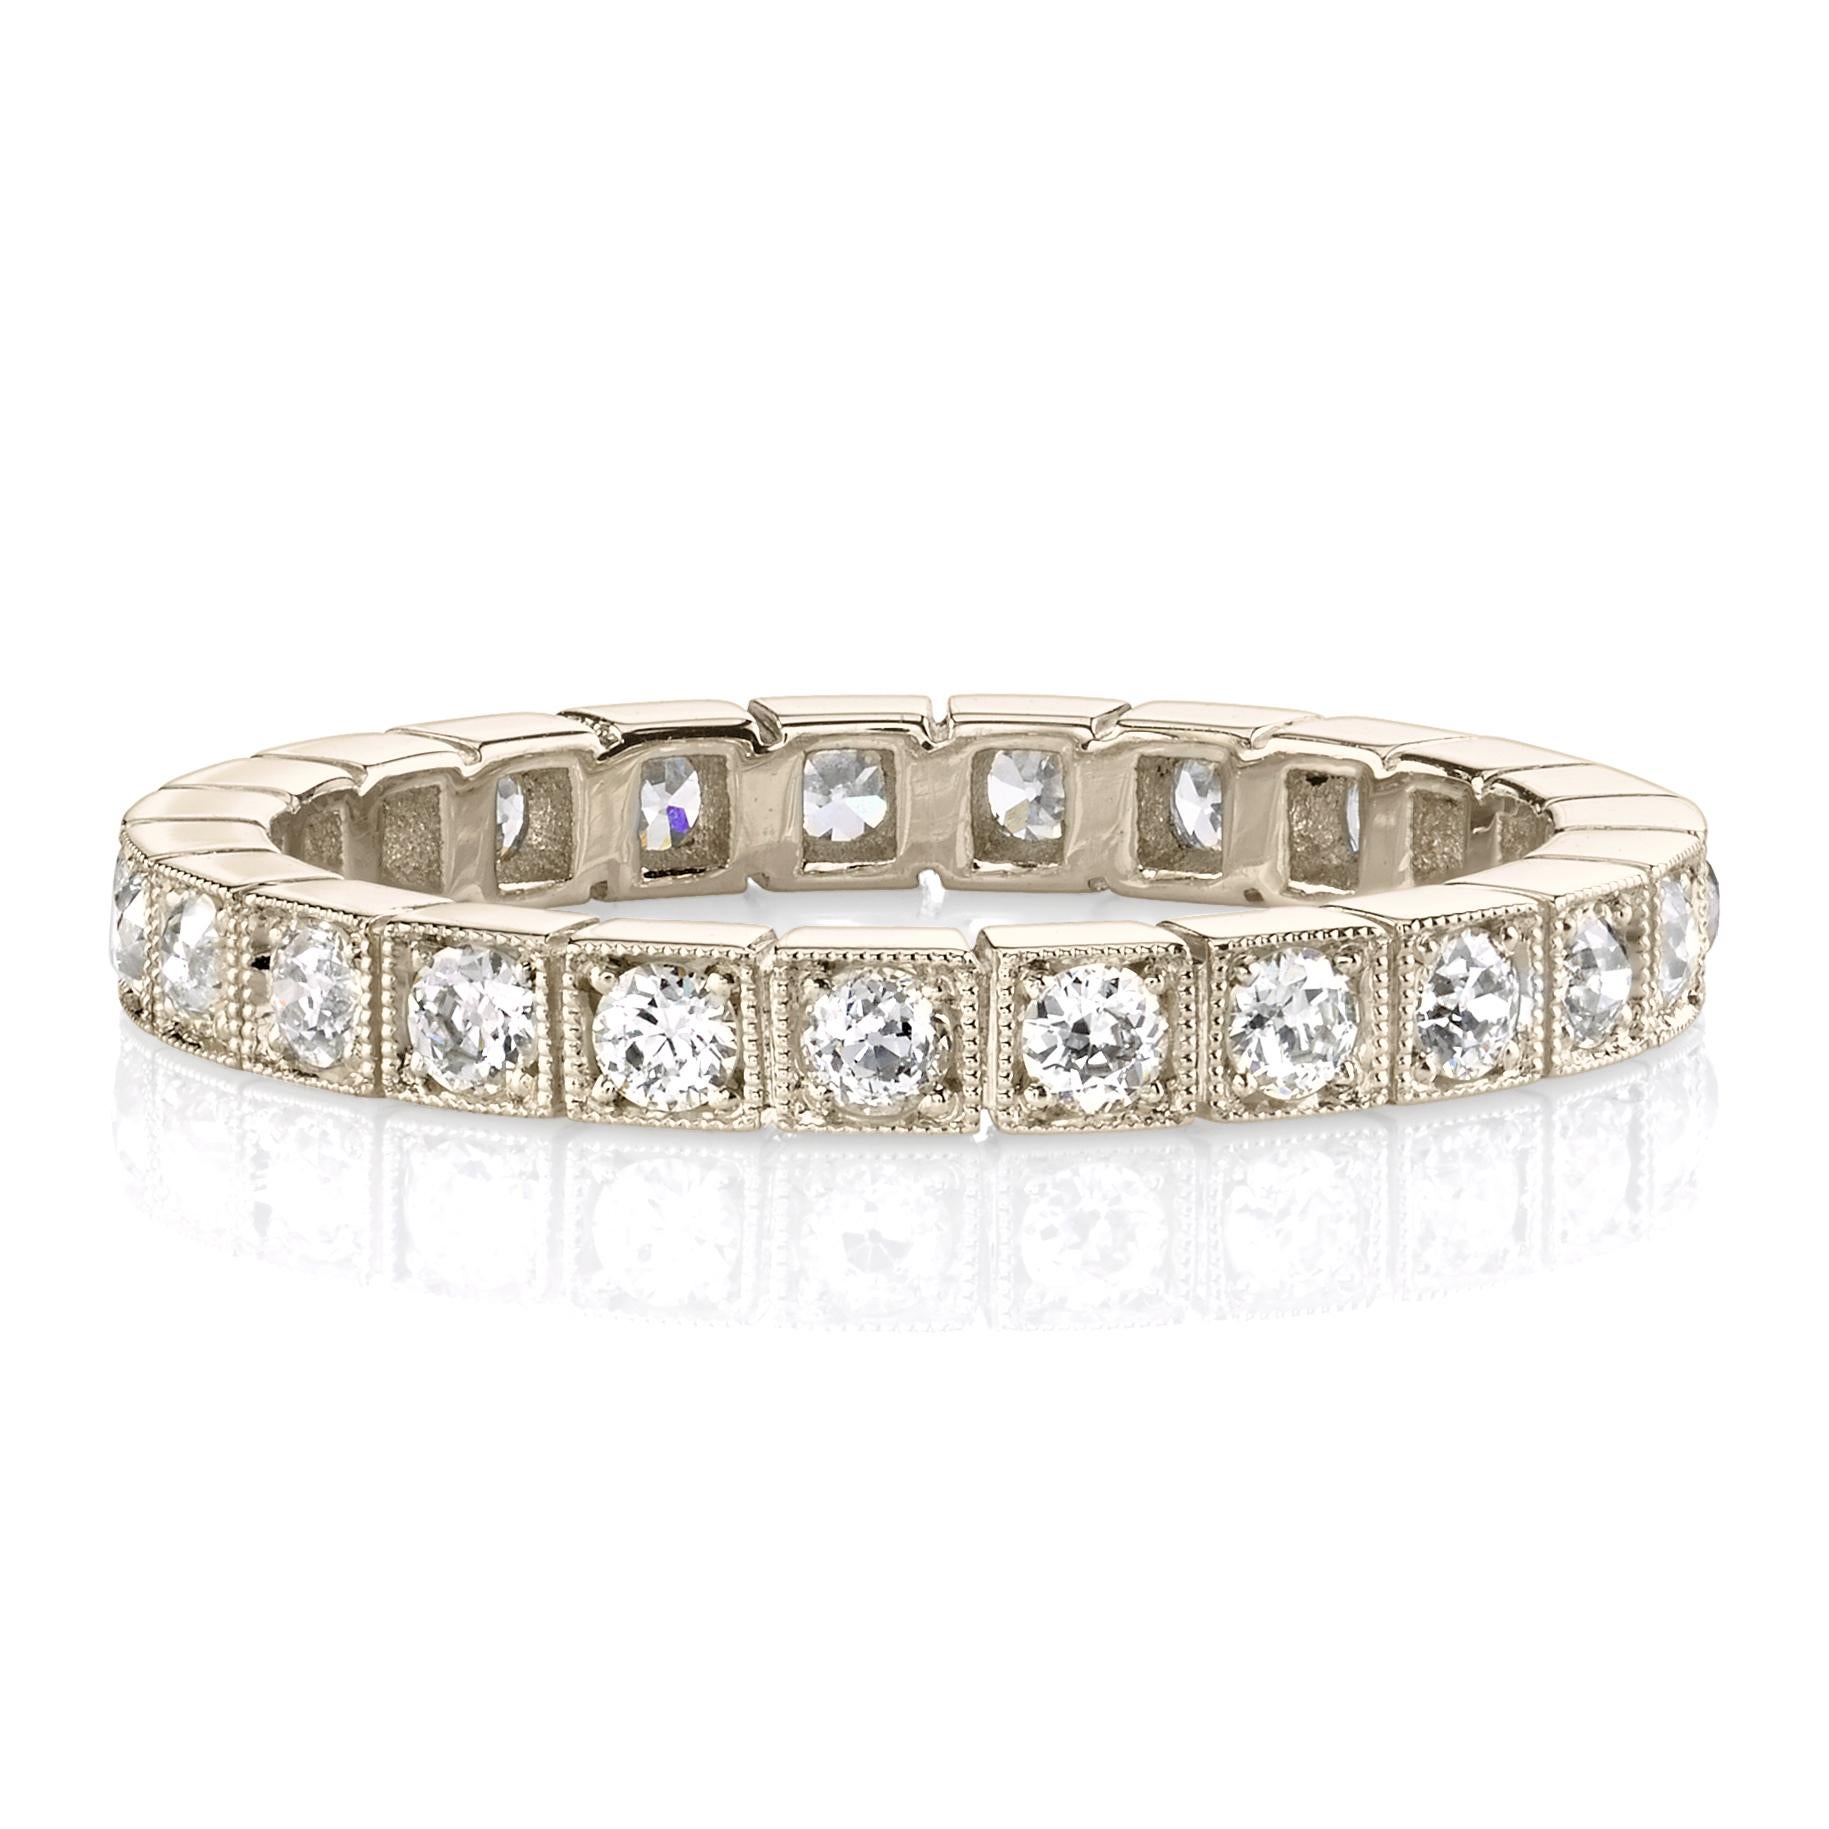 For Sale:  Handcrafted Becca Old European Cut Diamond Eternity Band by Single Stone 3